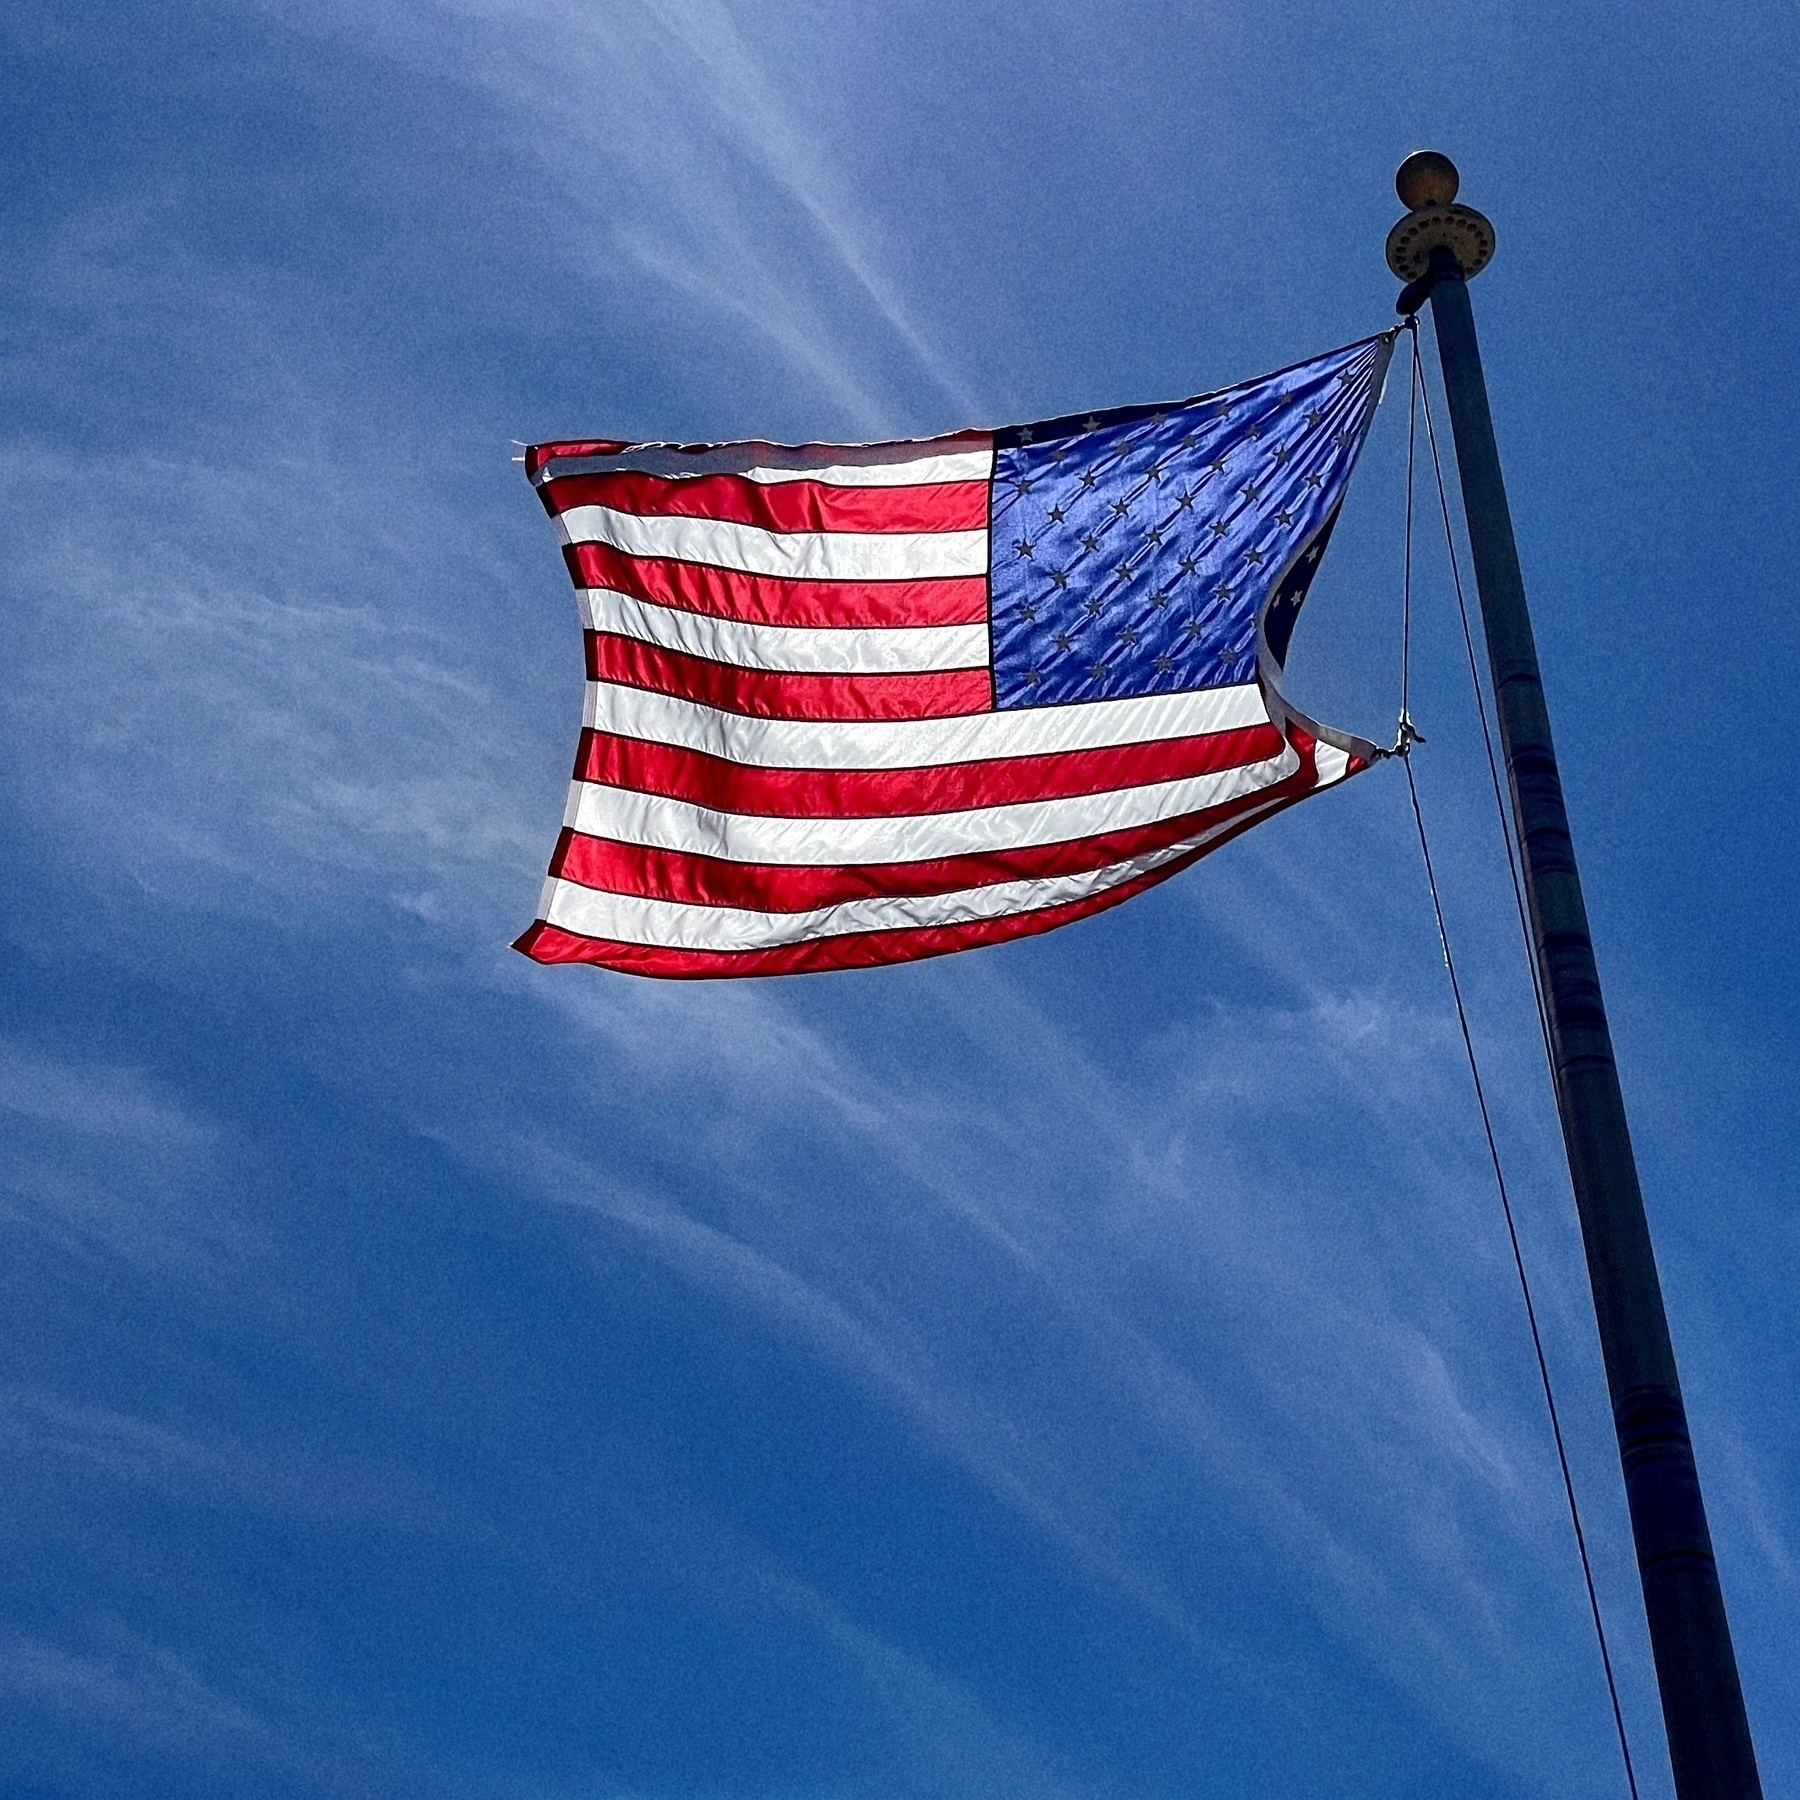 American flag on a flag pole blowing in the wind with a blue sky.